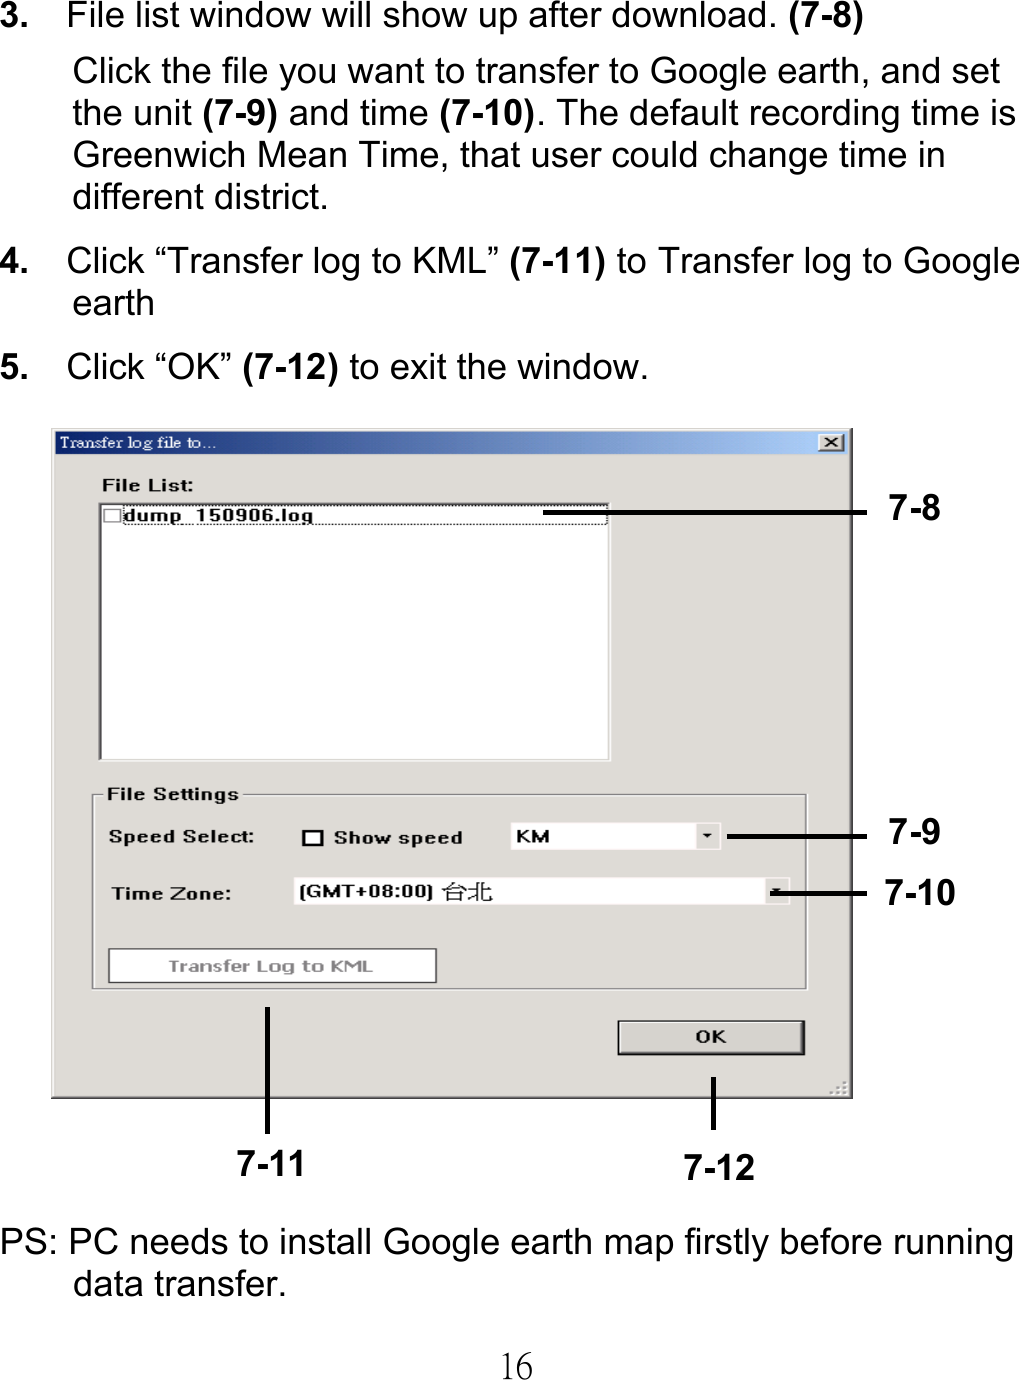  163.  File list window will show up after download. (7-8) Click the file you want to transfer to Google earth, and set the unit (7-9) and time (7-10). The default recording time is Greenwich Mean Time, that user could change time in different district. 4.    Click “Transfer log to KML” (7-11) to Transfer log to Google earth 5.   Click “OK” (7-12) to exit the window.     PS: PC needs to install Google earth map firstly before running data transfer. 7-8 7-9 7-107-11  7-12